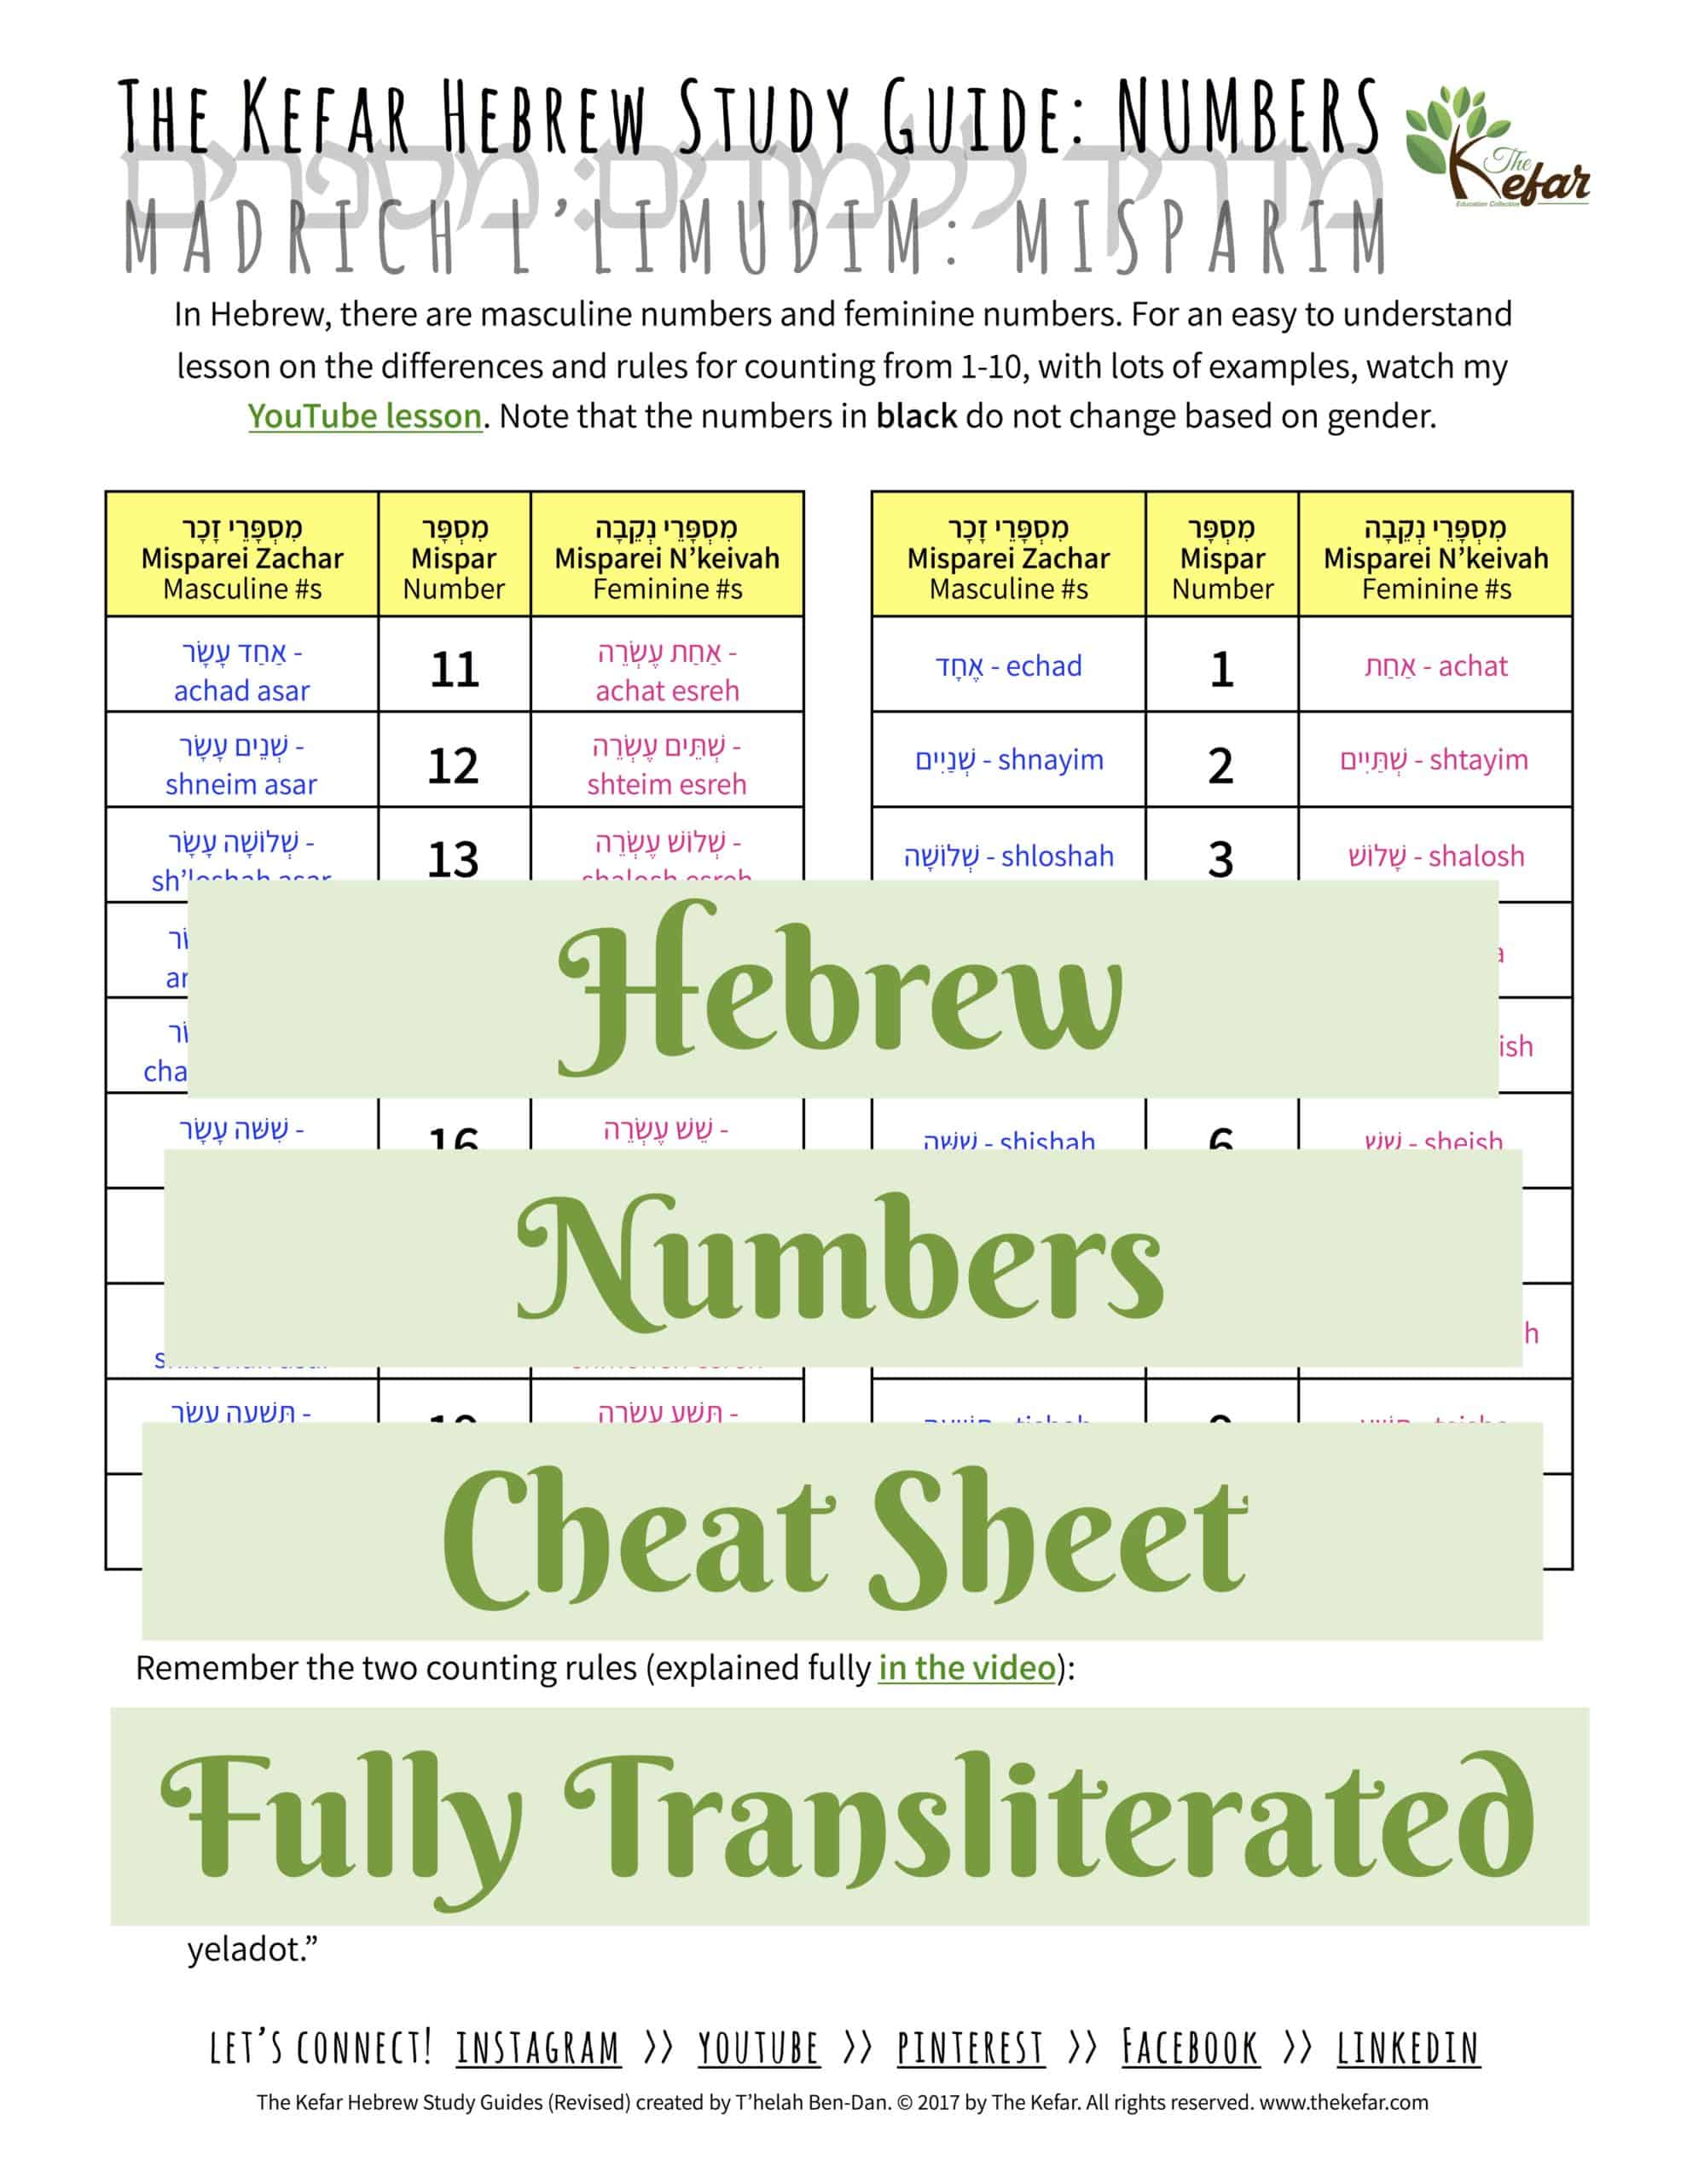 hebrew-numbers-cheat-sheet-fully-transliterated-the-kefar